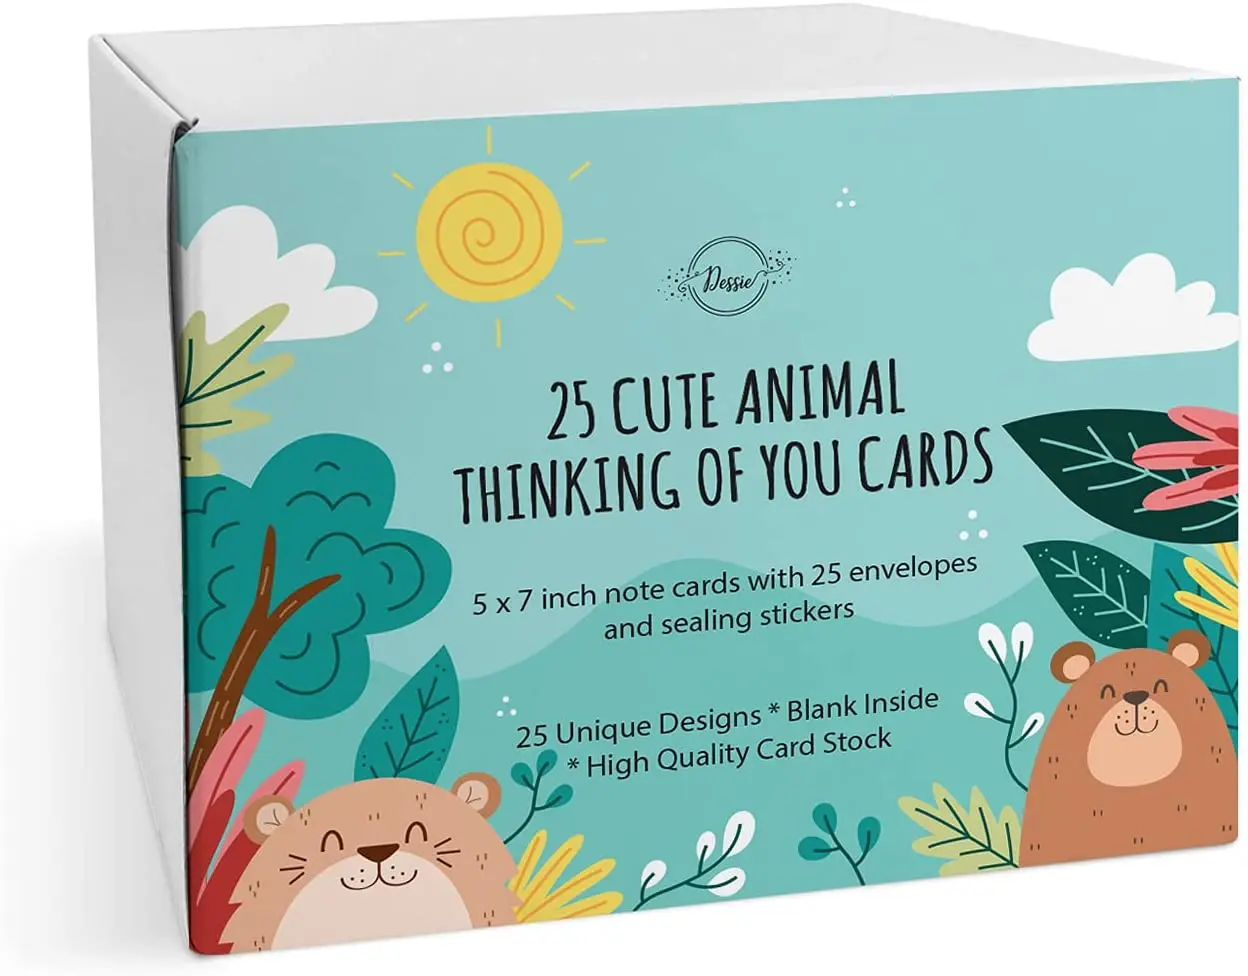 Custom Eye Catching Designs Cute Animal Thinking Of You Greeting Cards  Printing With Greetings Inside - Buy Custom Greeting Cards Printing,Eye  Catching Designs Cute Animal Thinking Of You Greeting Cards,Greeting Cards  With